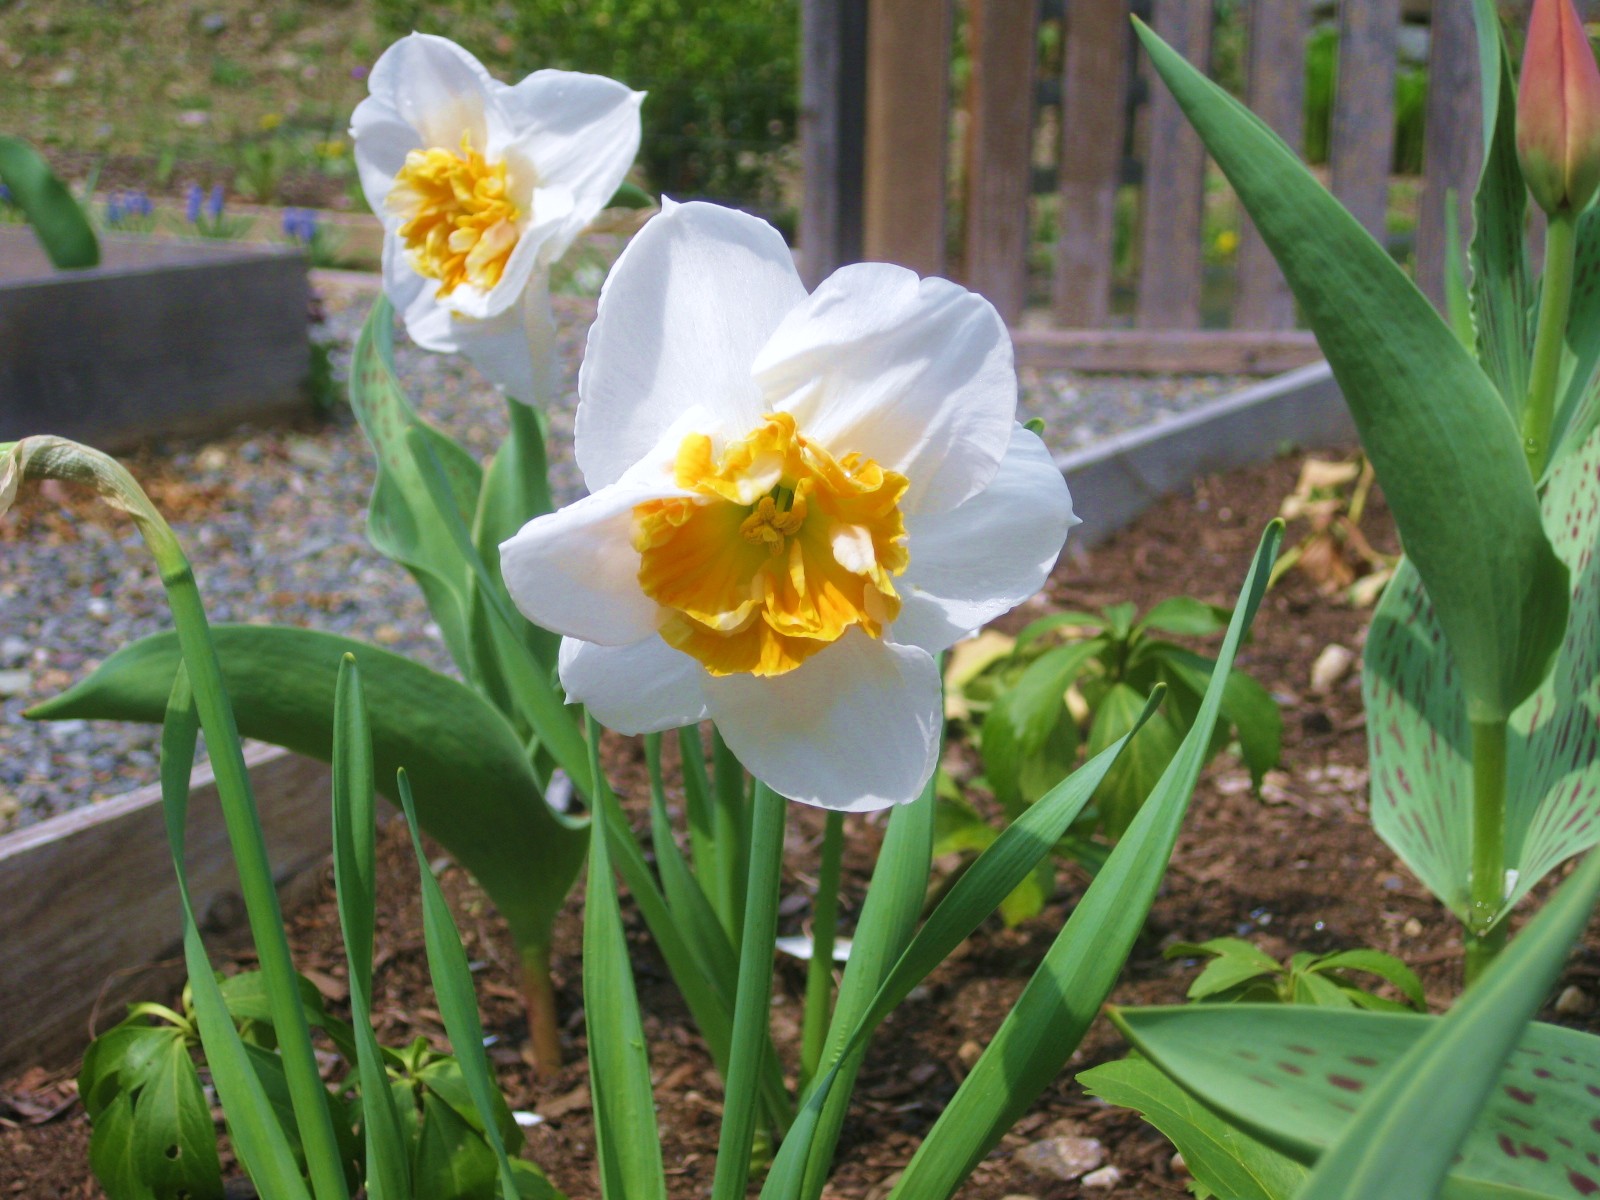 First Aid for Non-Blooming Daffodils